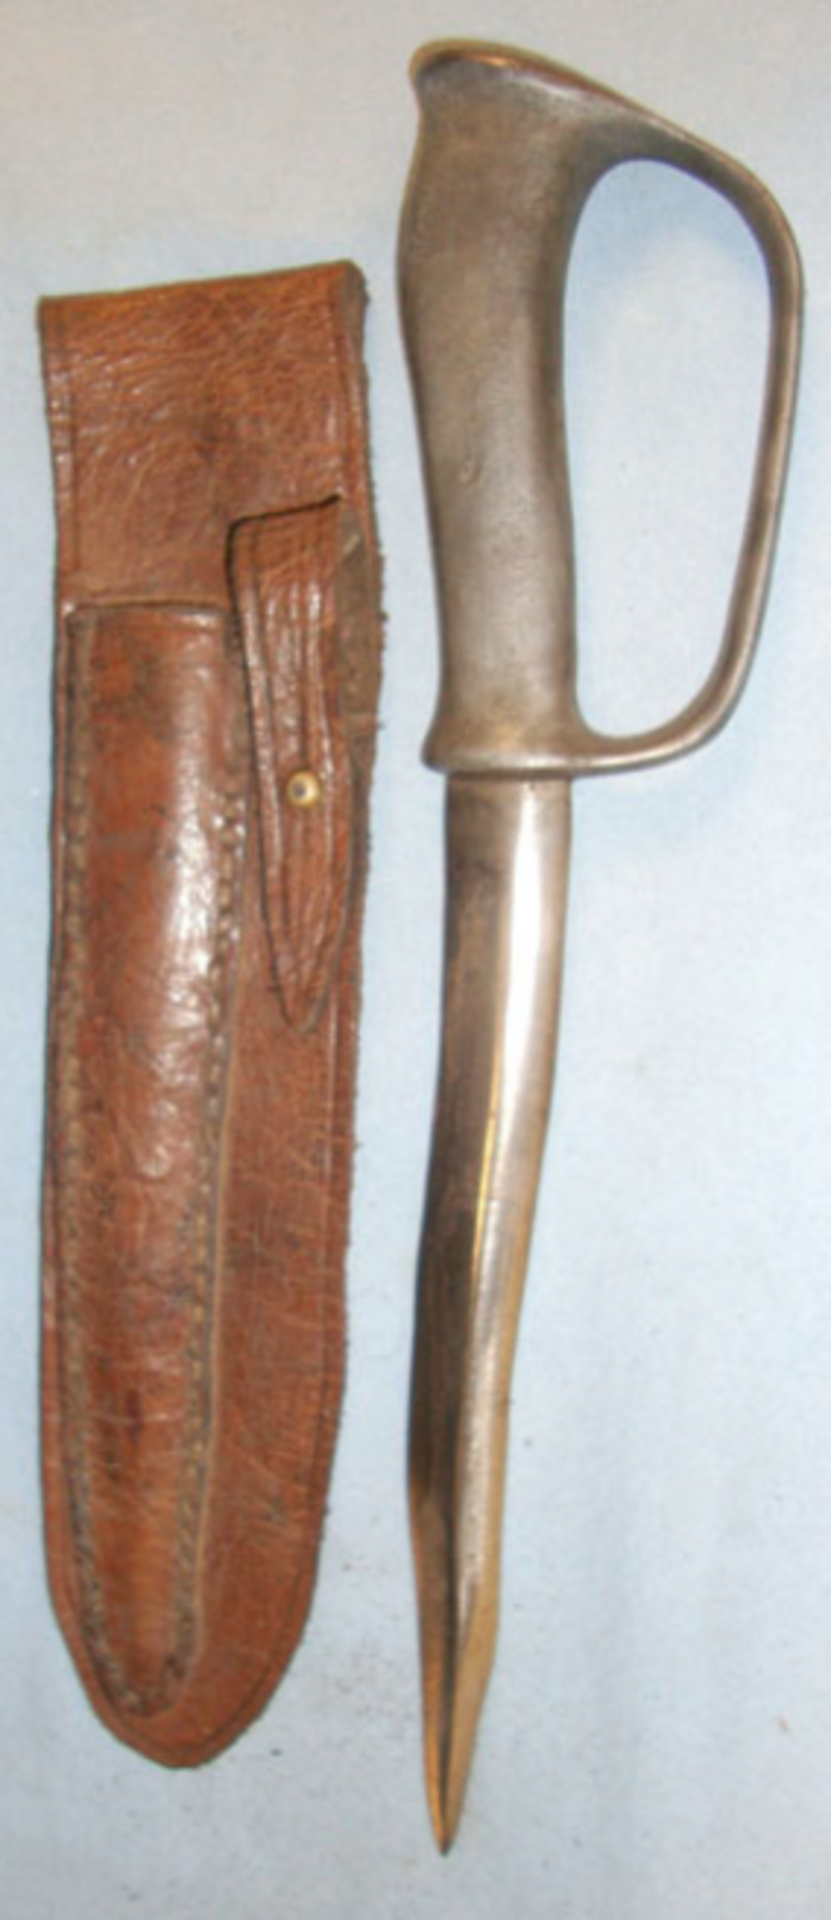 RARE VARIANT, WW1 Robbins Of Dudley Trench Fighting Knife With Kris Form Blade & Leather Sheath